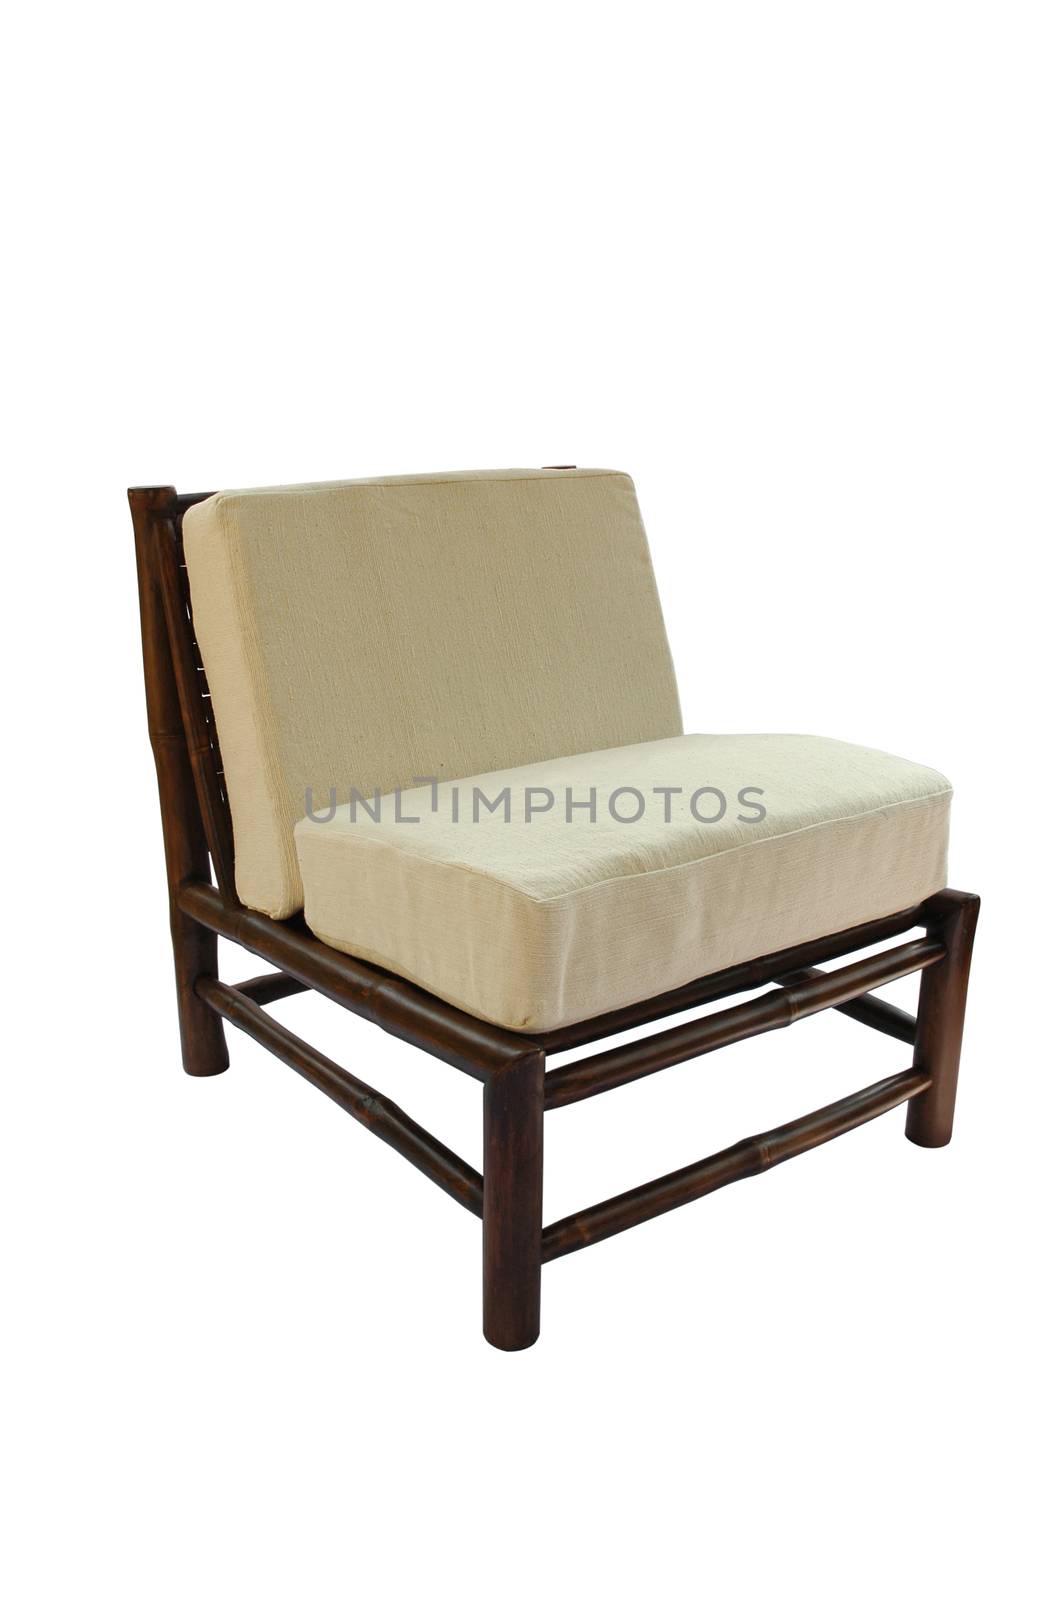 Bamboo chair with pillow  isolated on white background